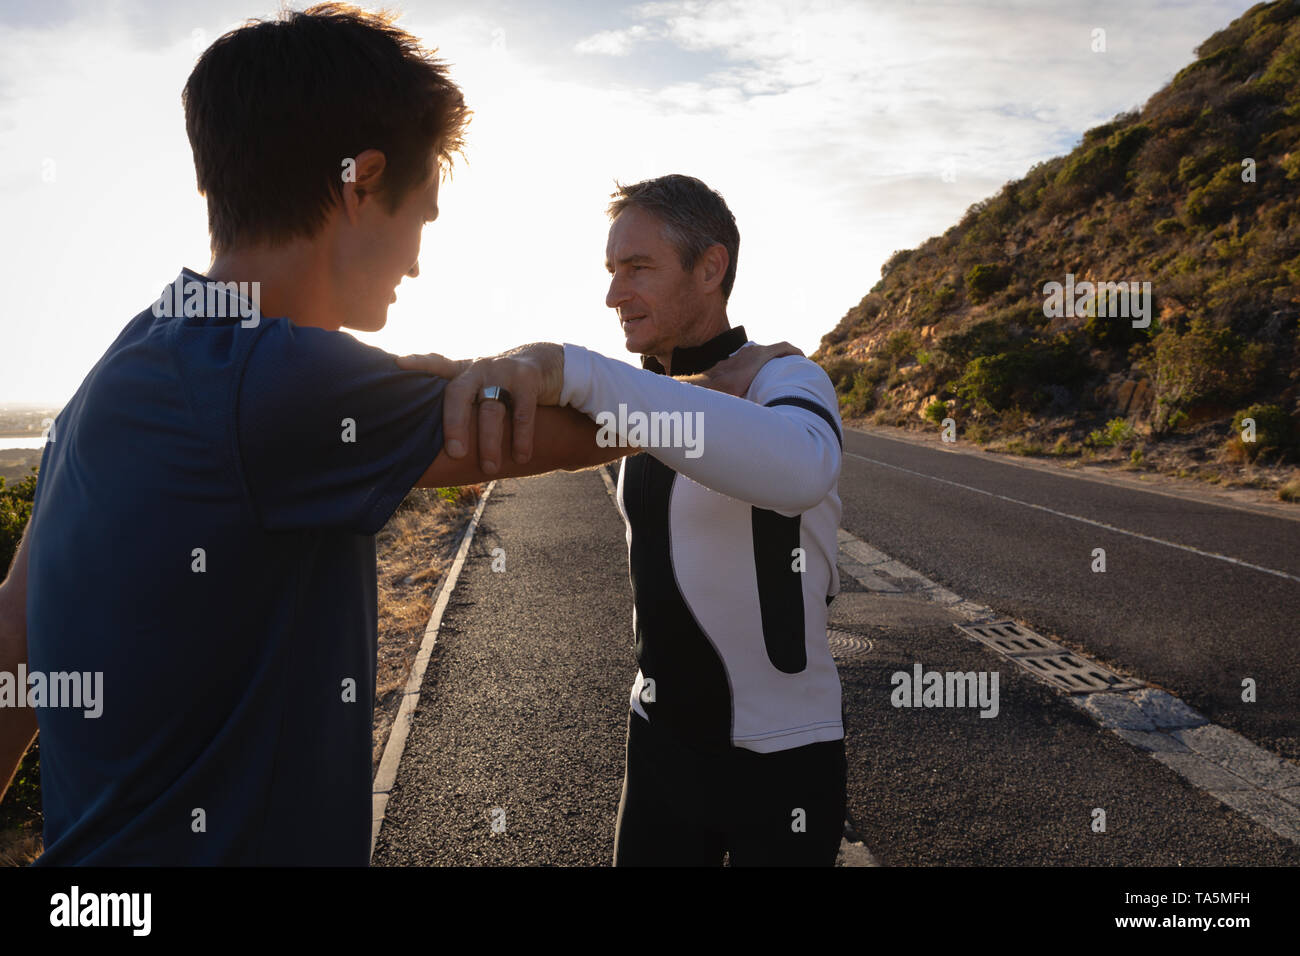 Father and son doing stretching exercise on road Stock Photo